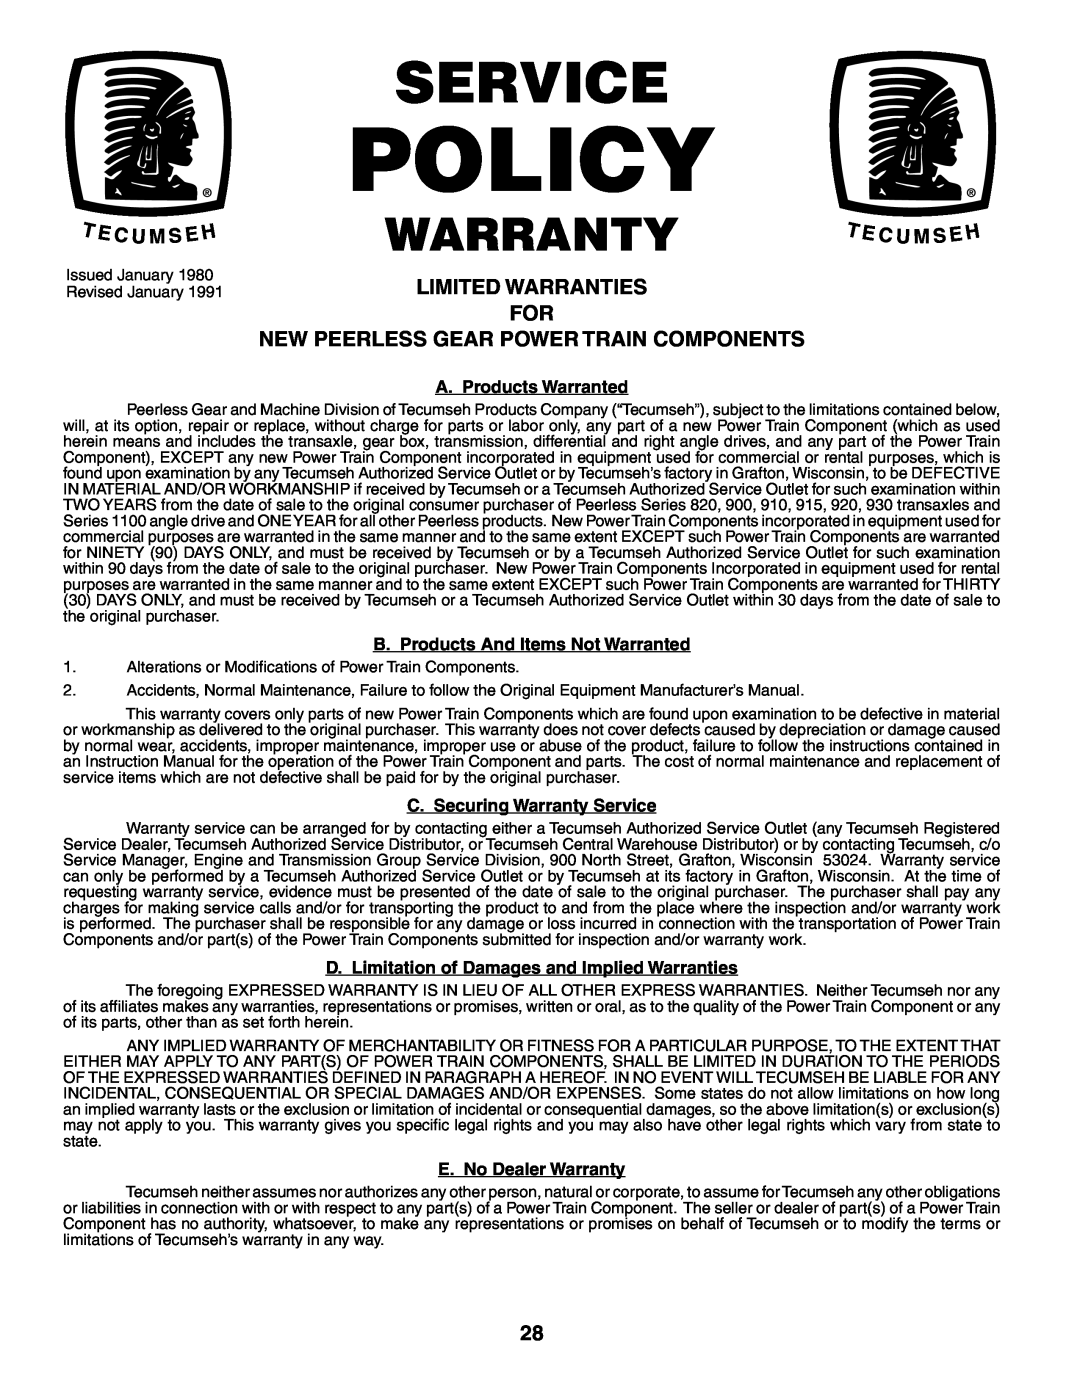 Poulan 194563 manual Limited Warranties For New Peerless Gear Power Train Components, Policy, Service, Warranty 